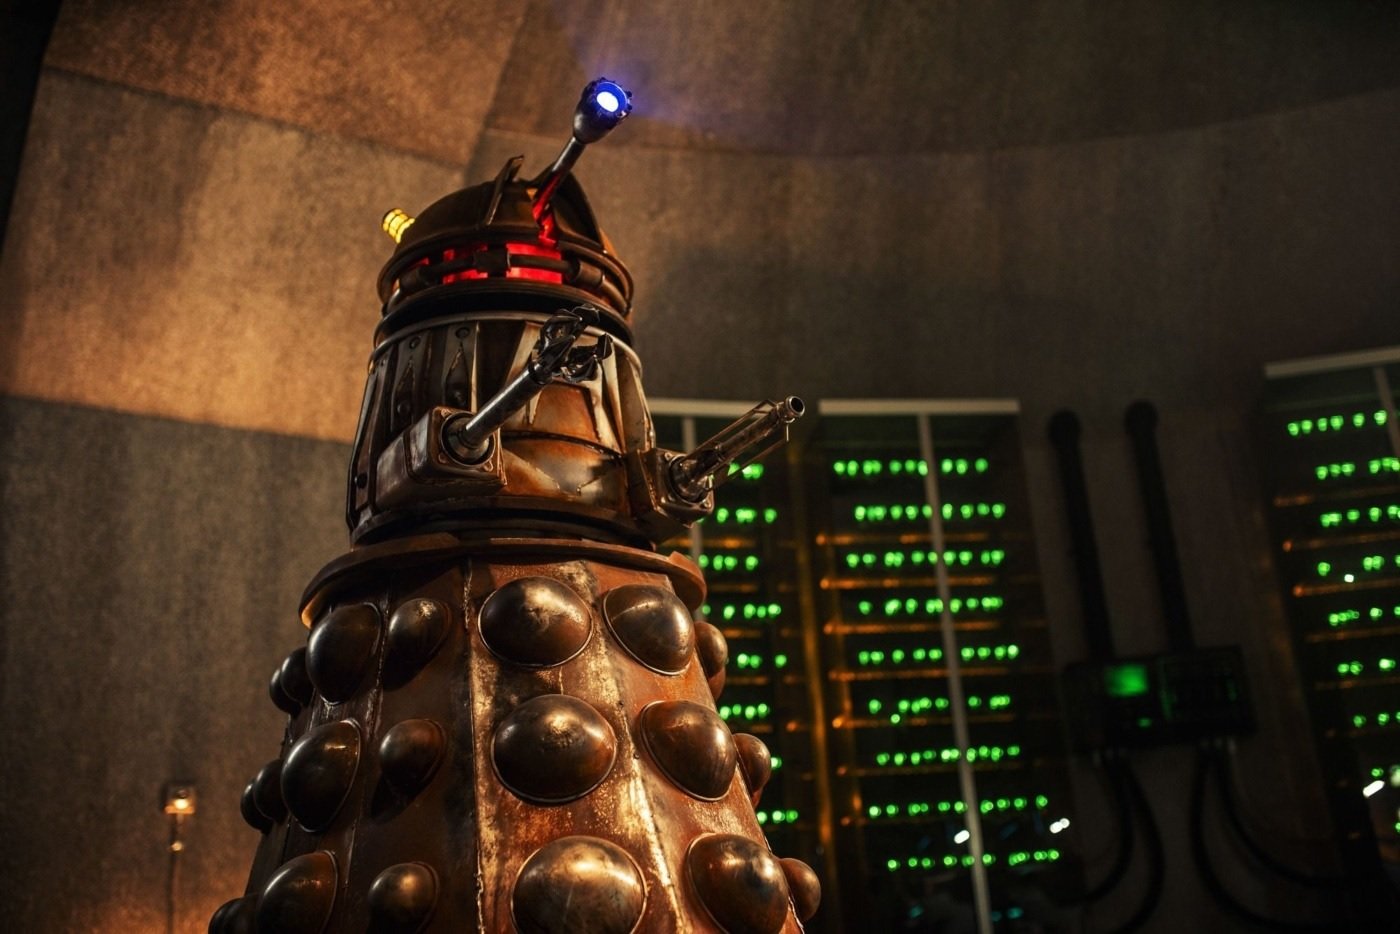 Leaked Photos of Revolution of the Daleks Gives Closer Look at New Dalek Design